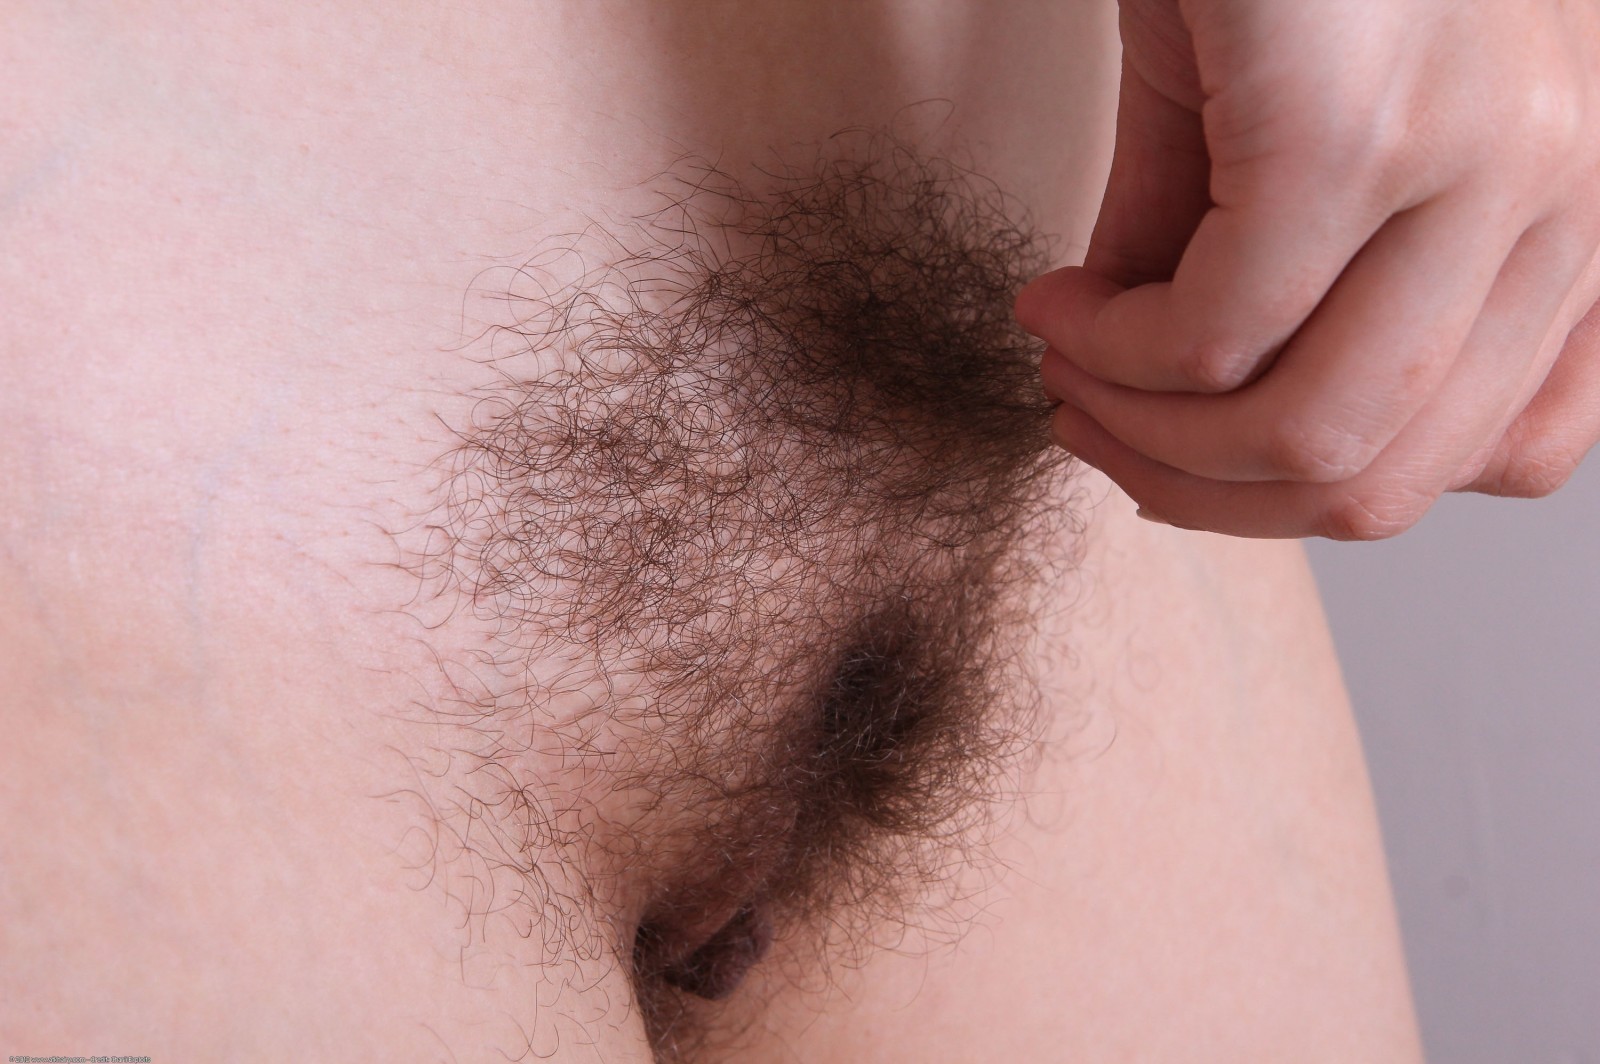 Hairy playful amateur showing unshaven muff #68359248